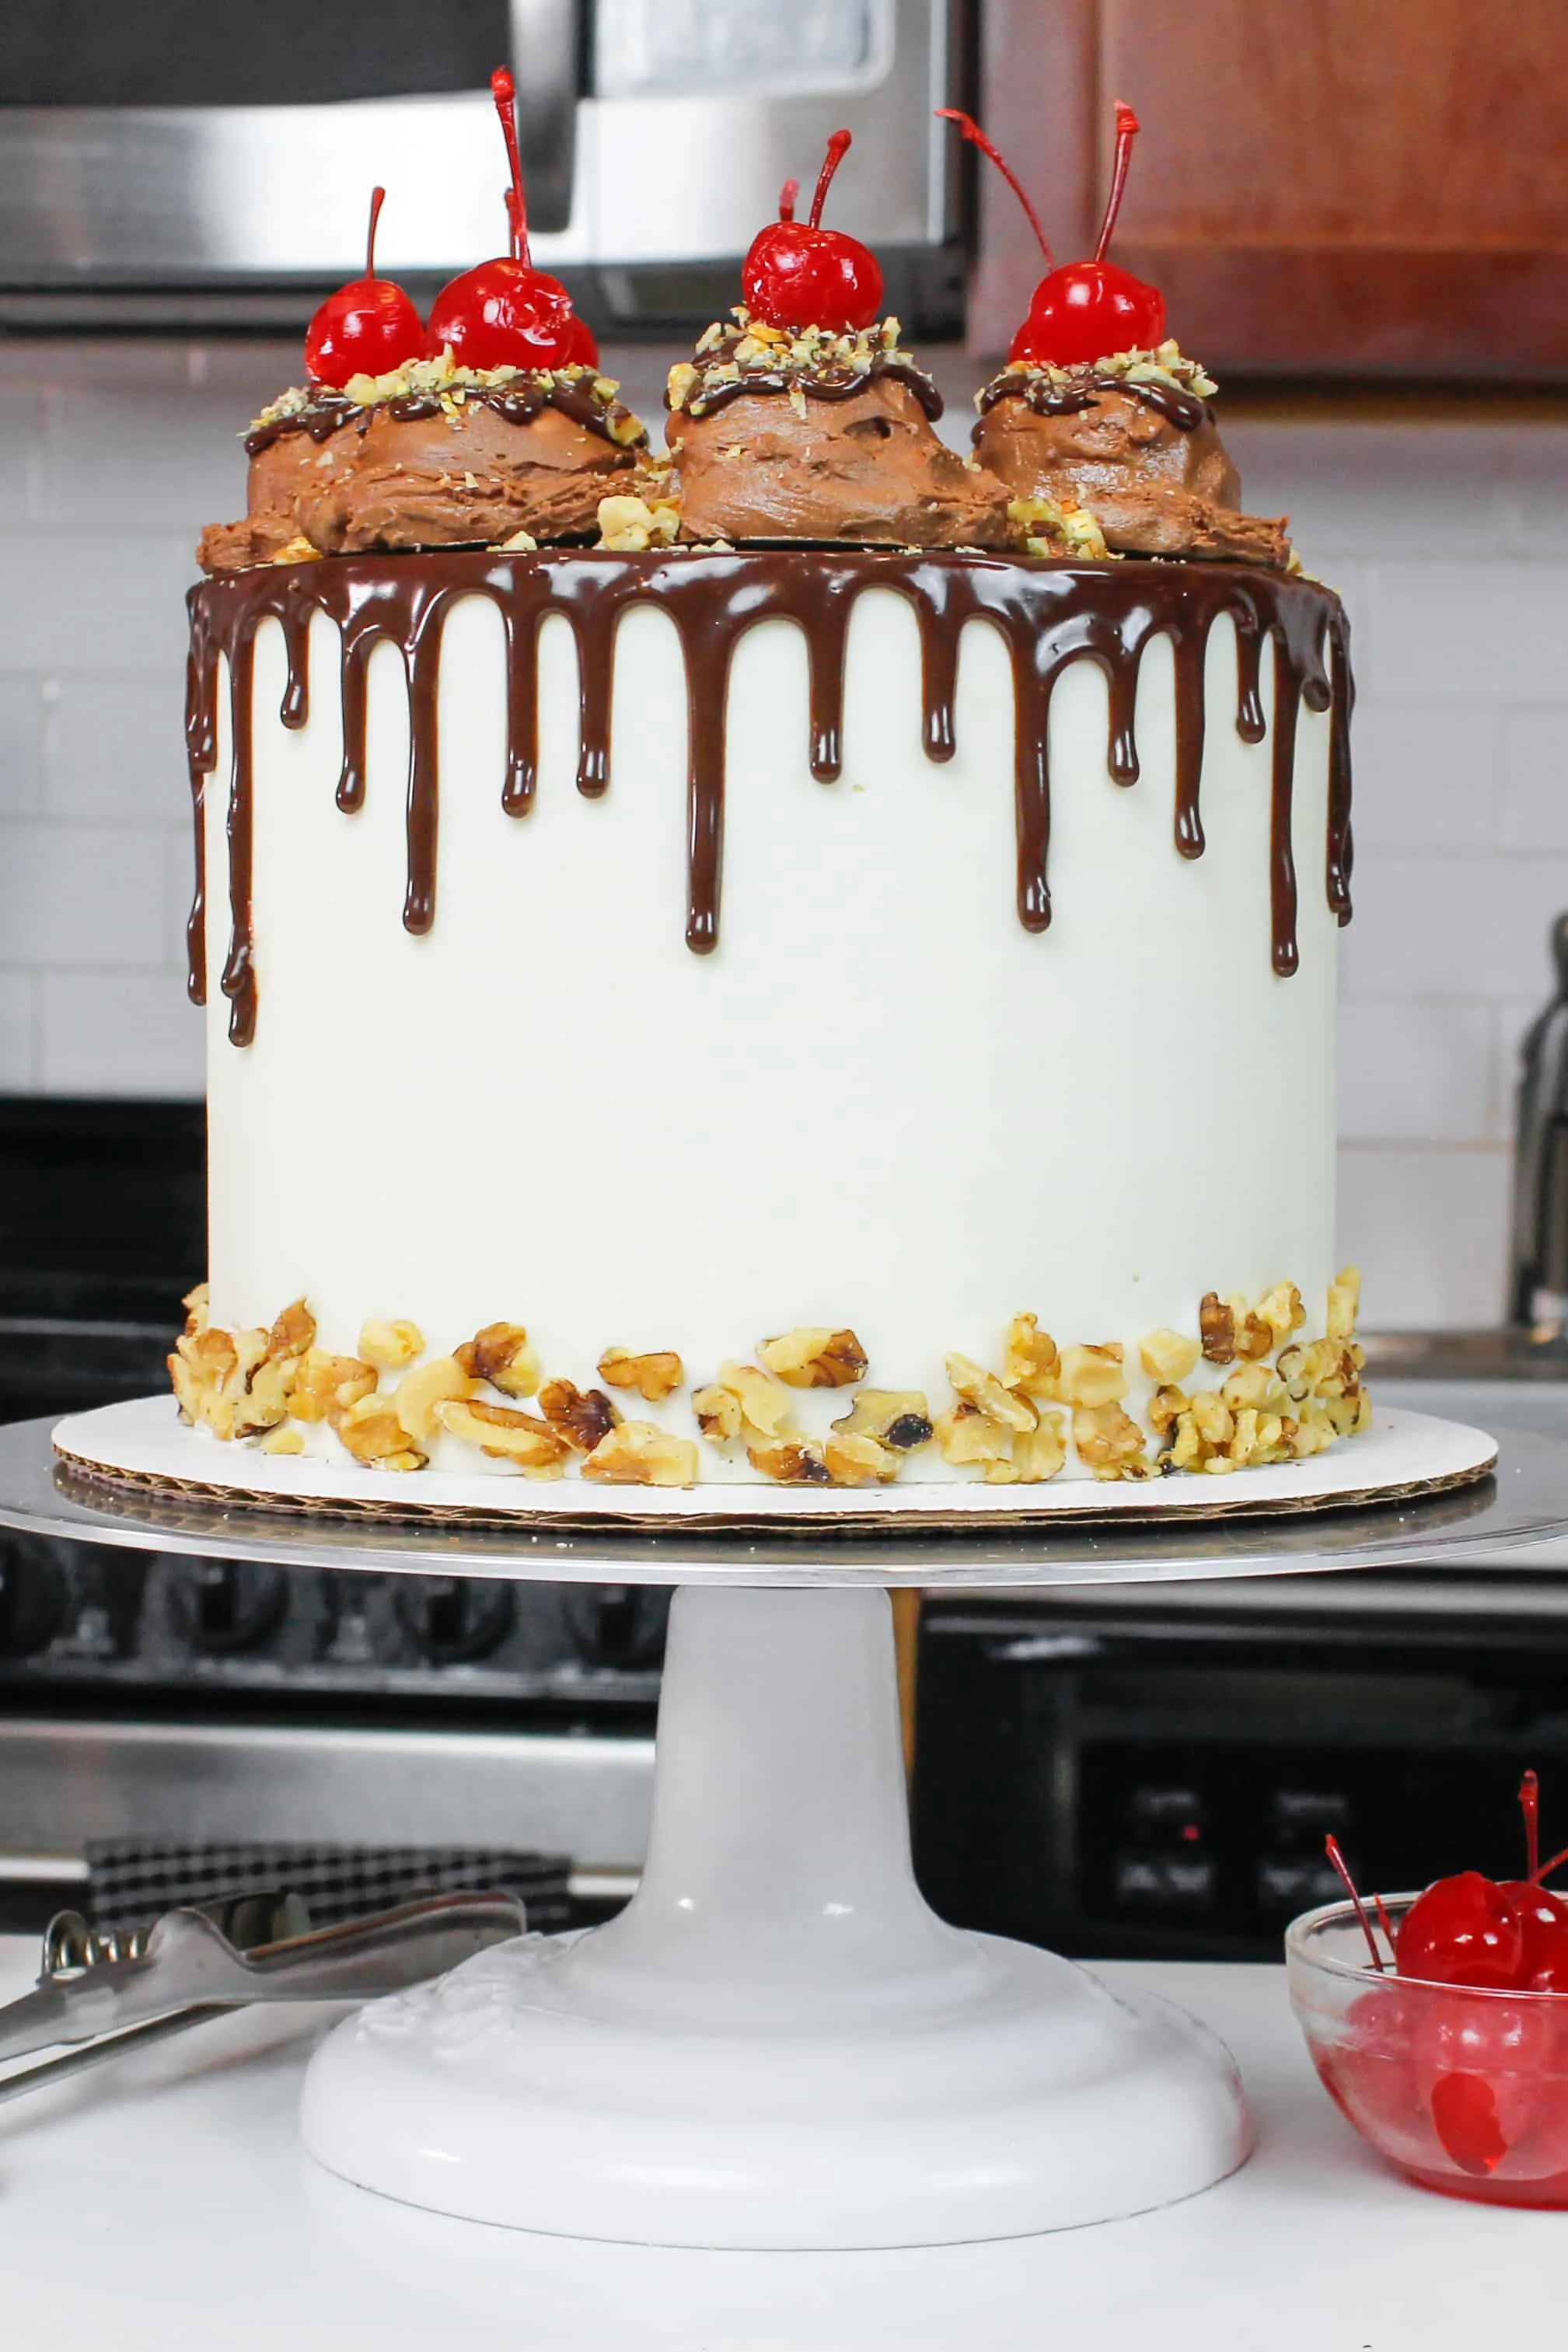 finished rocky road chocolate cake with chocolate drip